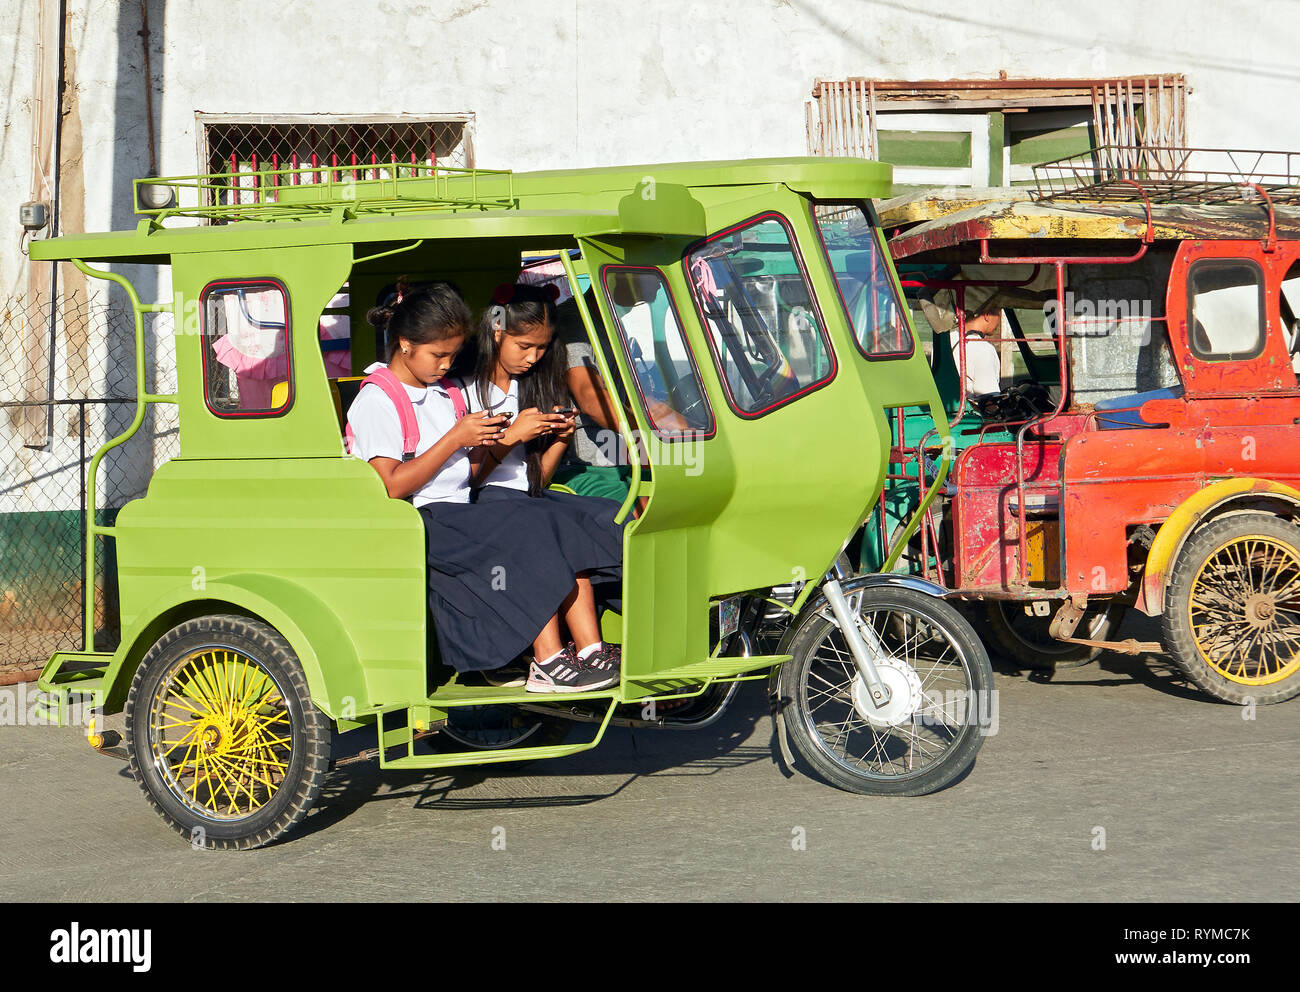 Romblon, Romblon Province, Philippines: Colorful tricycle in front of an old house with two student girls using their mobile phone Stock Photo